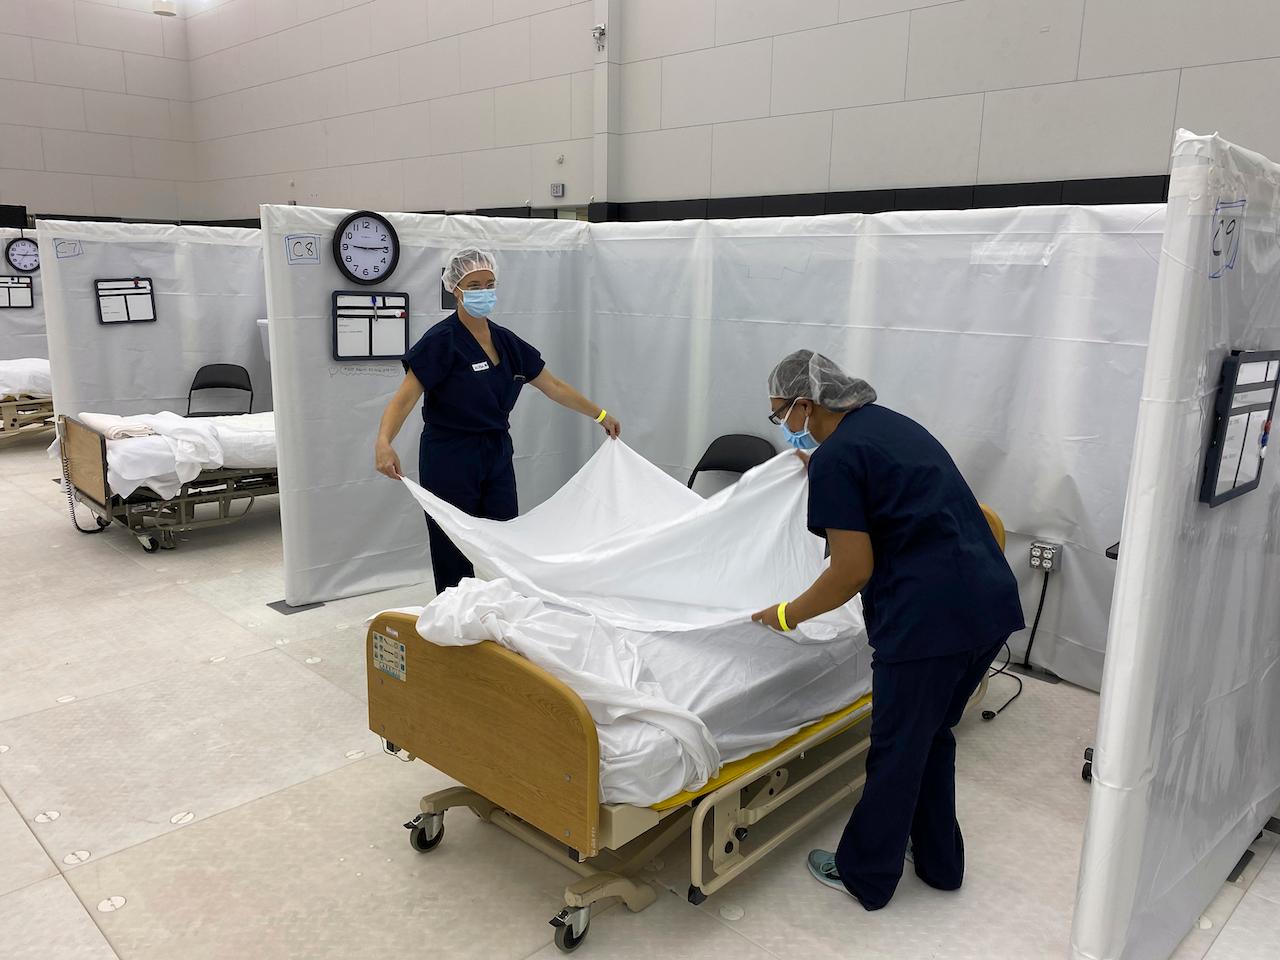 Healthcare workers set up beds at a facility in Sacramento, California on Dec 9. Photo: AP